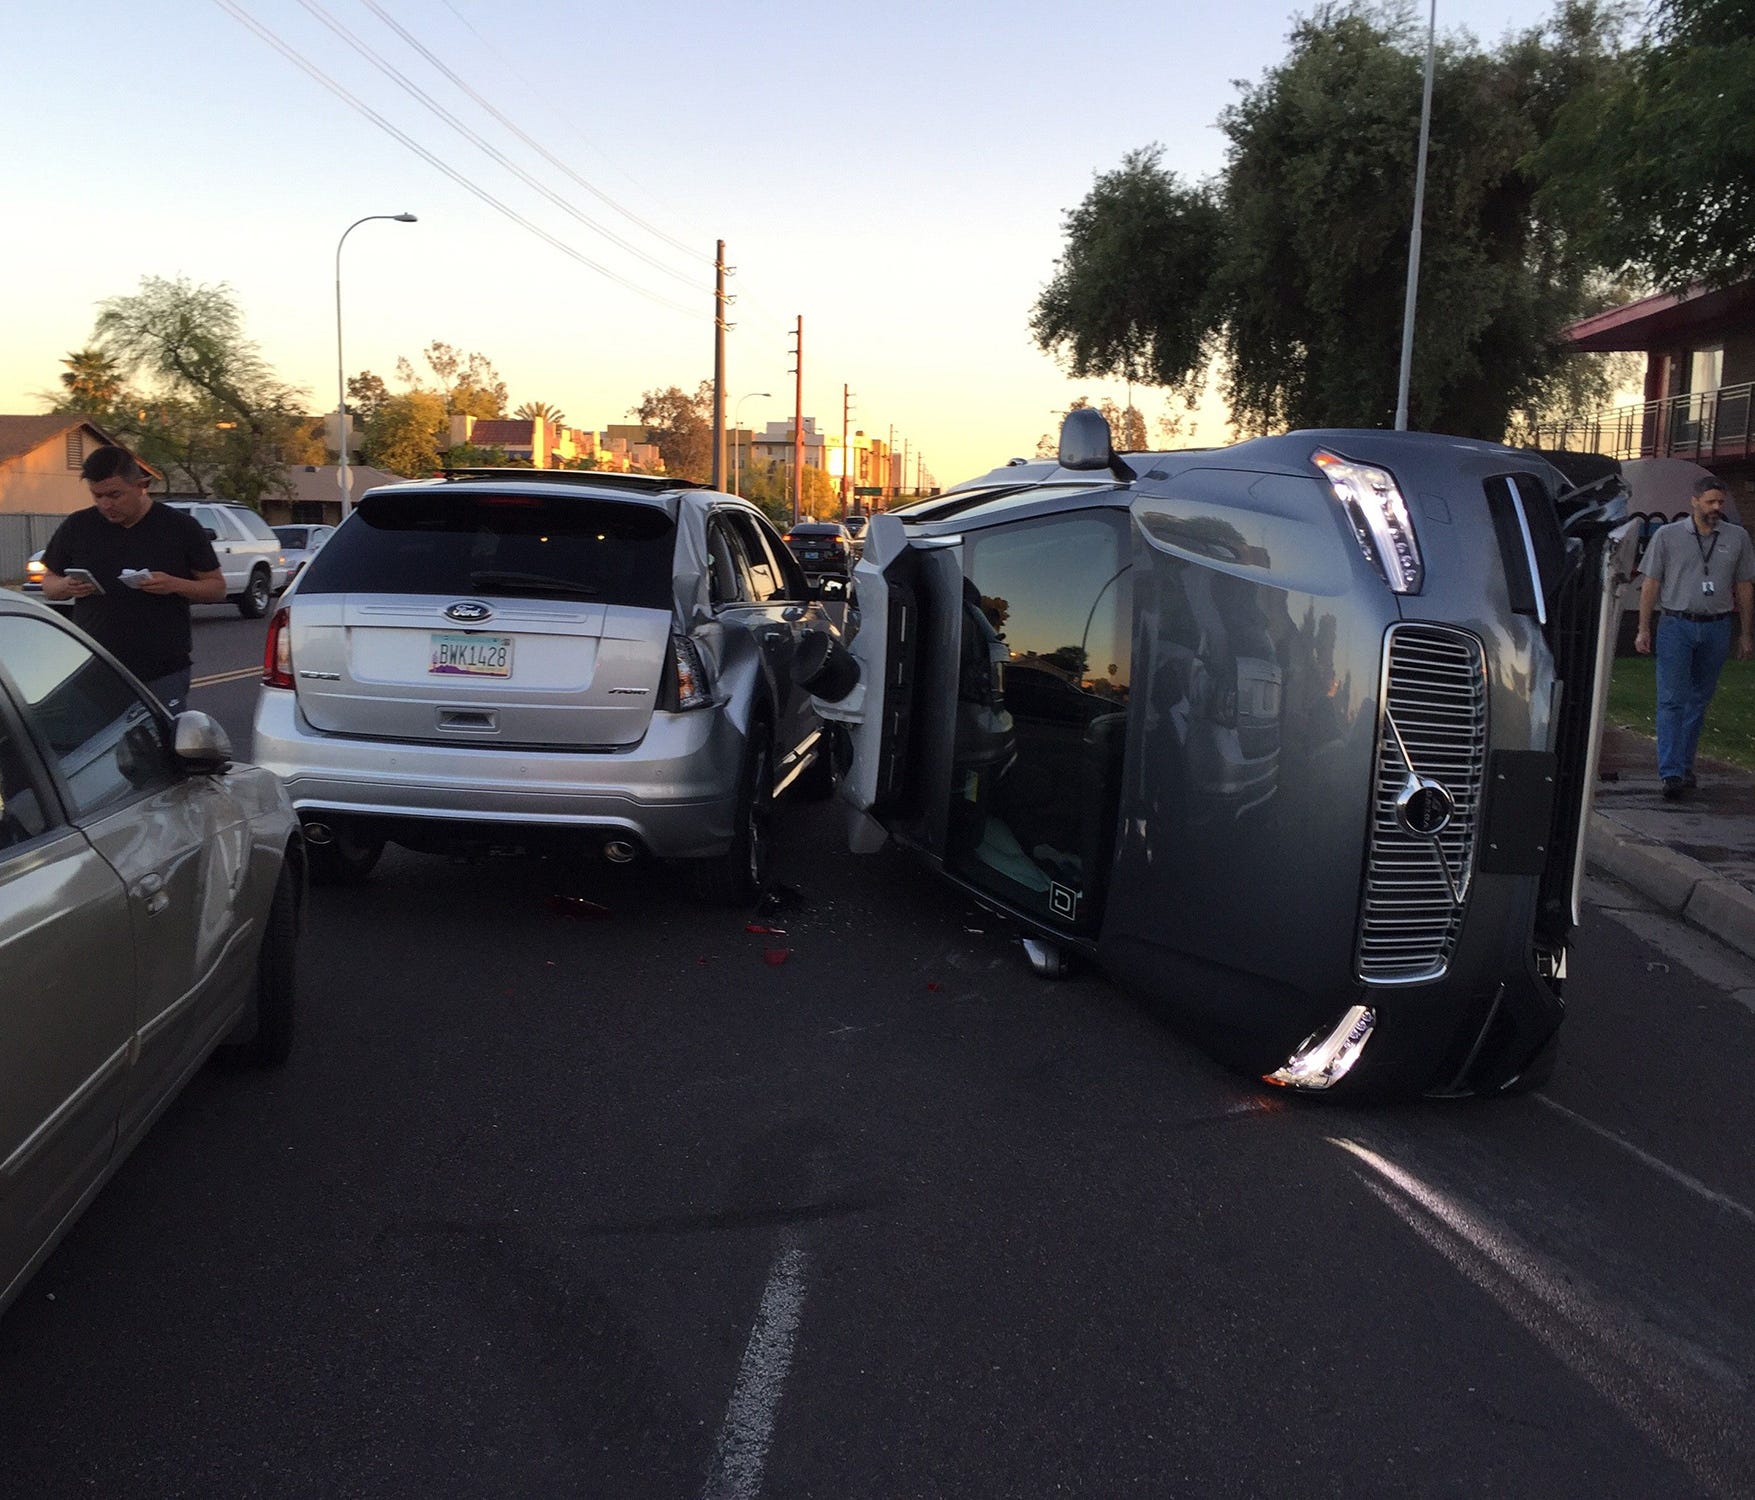 The scene from an accident involving a self-driving Uber car on Friday, March 24, 2017. The car on its side is the Uber vehicle. The Tempe, Ariz., police department released the accident report Wednesday, March 29, 2017. The driver who made the left 